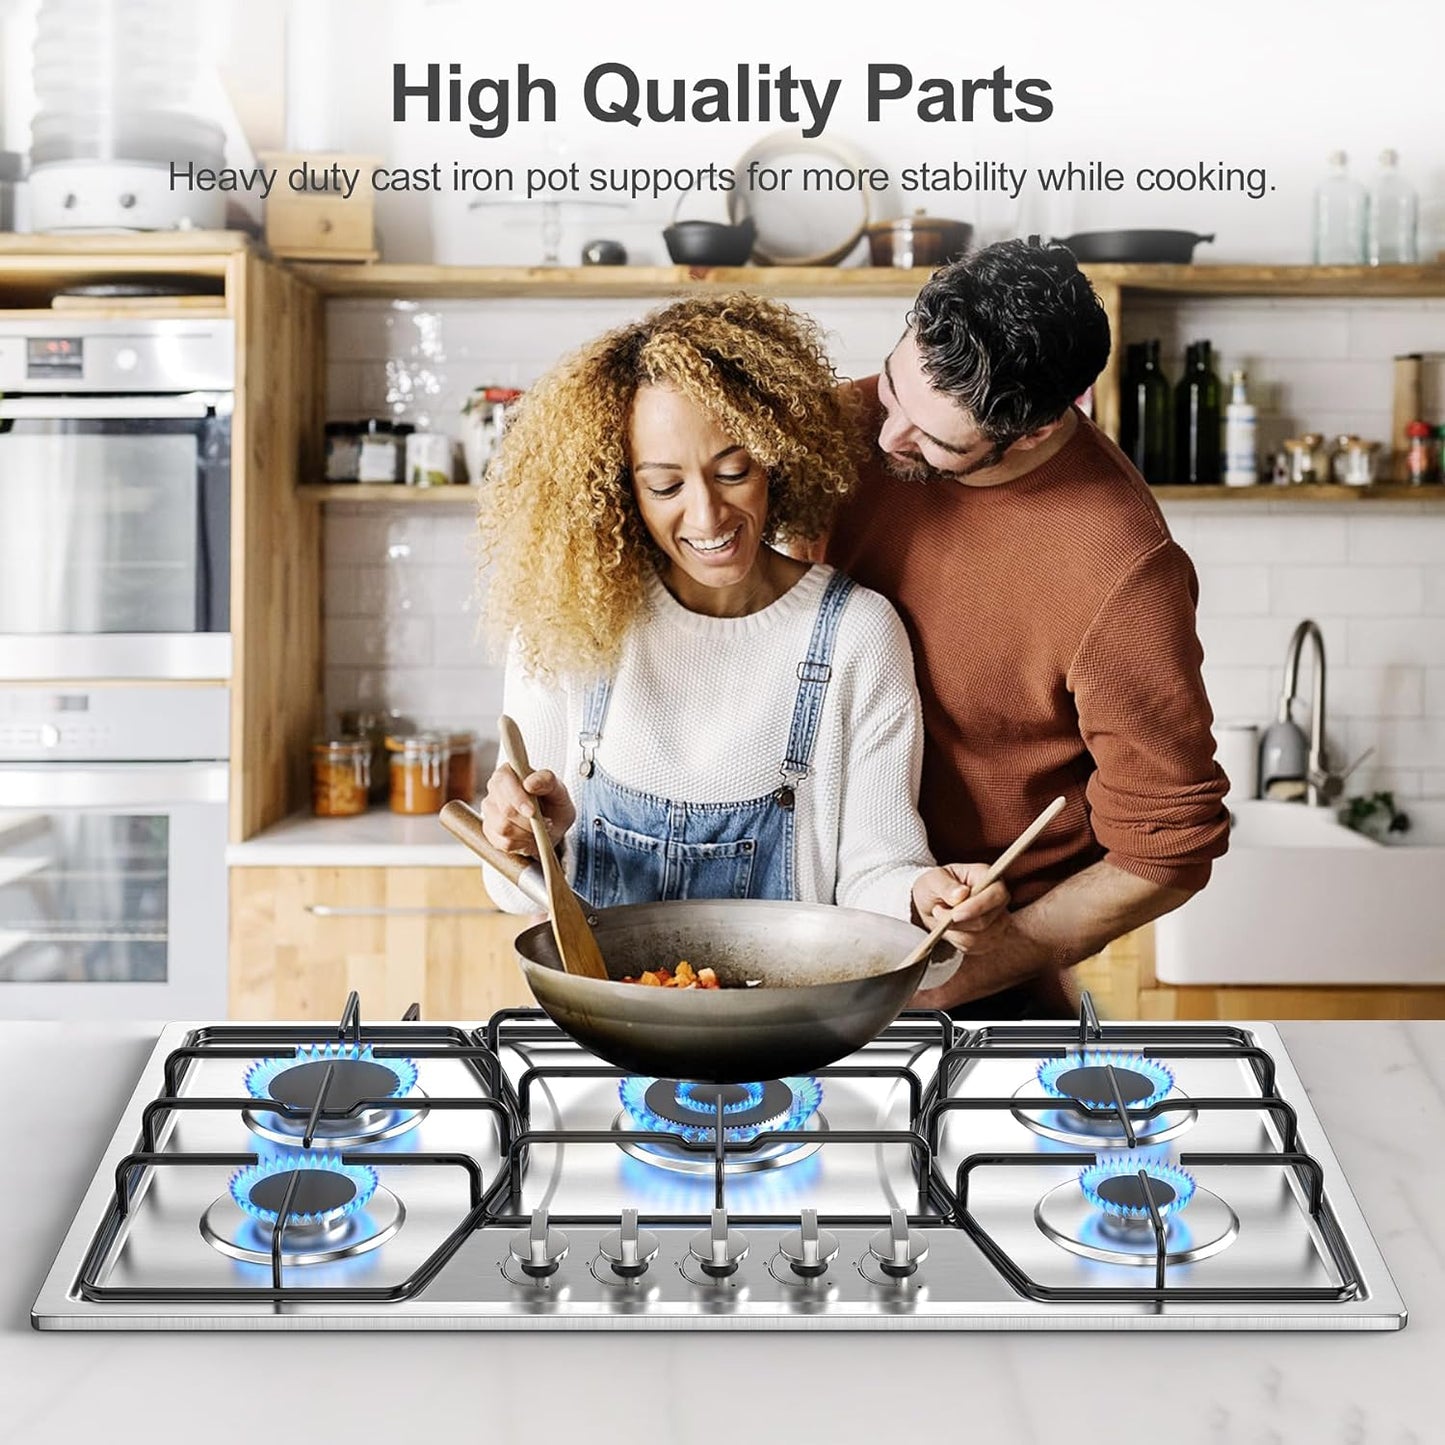 GIHETKUT Gas Cooktop 5 Burners, 35Inch Gas Stove Top Stainless Steel, Built-in Gas Propane Cooktops with Thermocouple Protection, NG/LPG Convertible, Electronic Ignition Gas Hob for Kitc